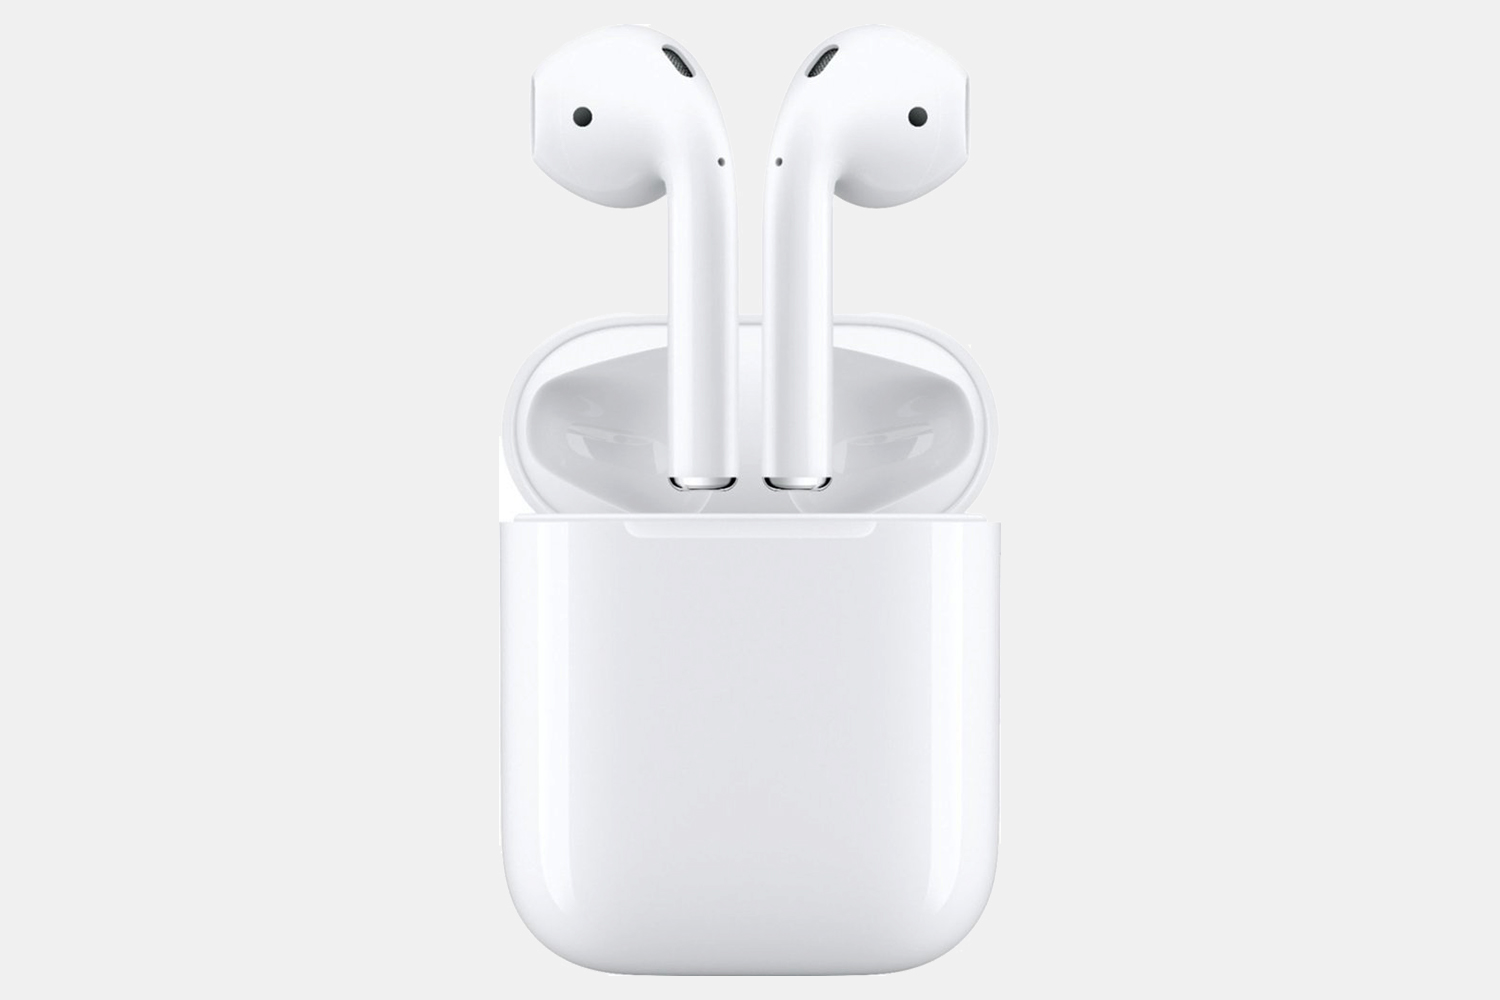 This Is a New Low Price on Second Generation AirPods - InsideHook